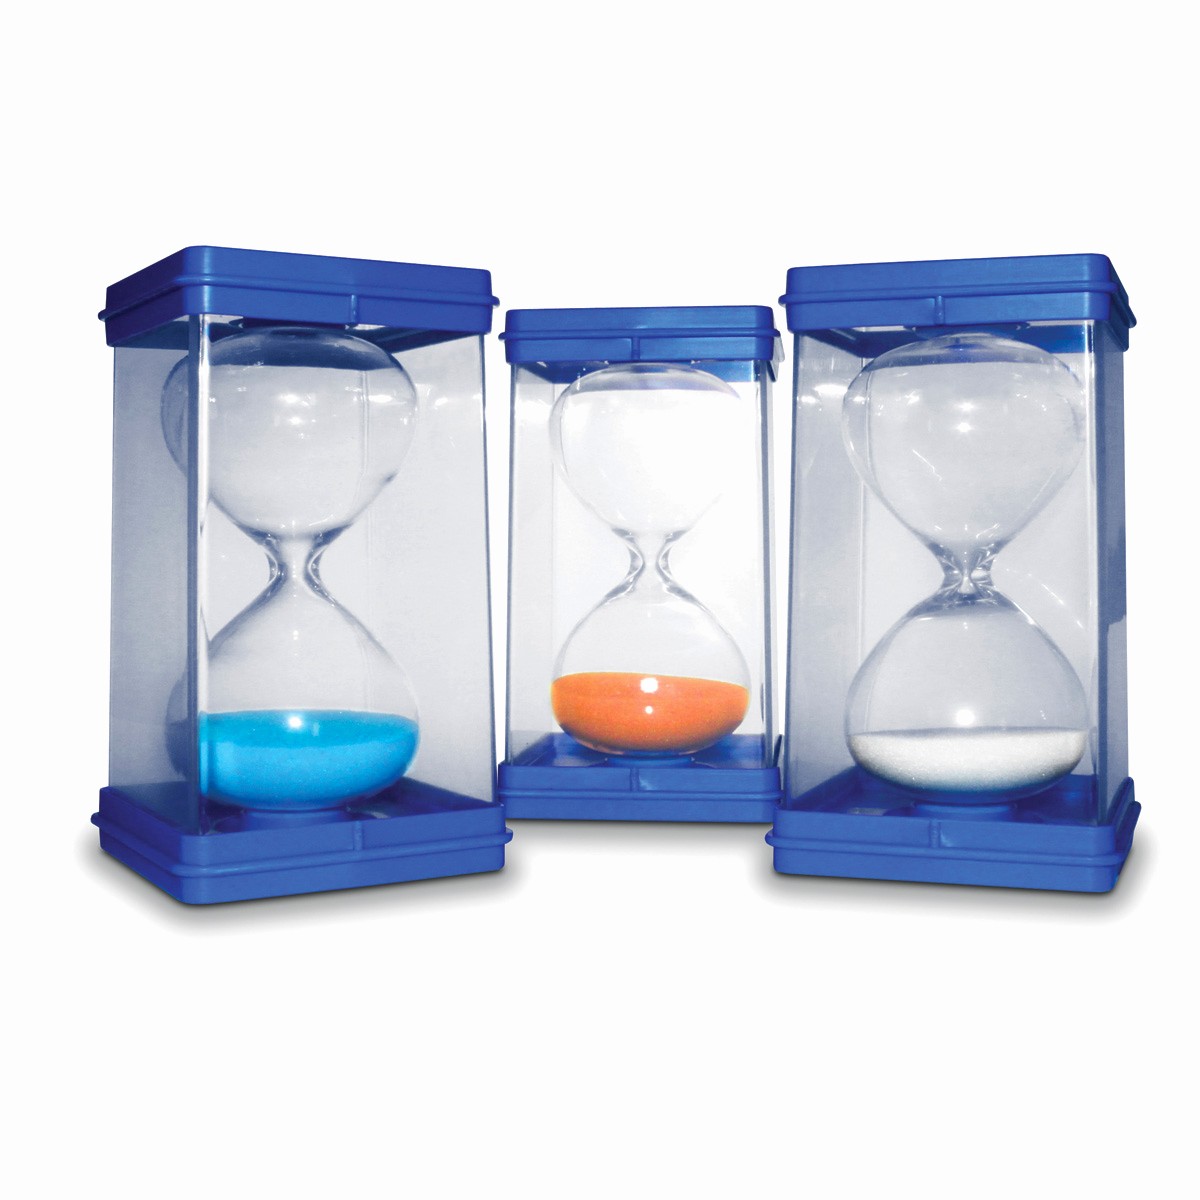 Set Timer for 5 Mins New Buy Invicta Sand Timers Set Of 3 30 Seconds 1